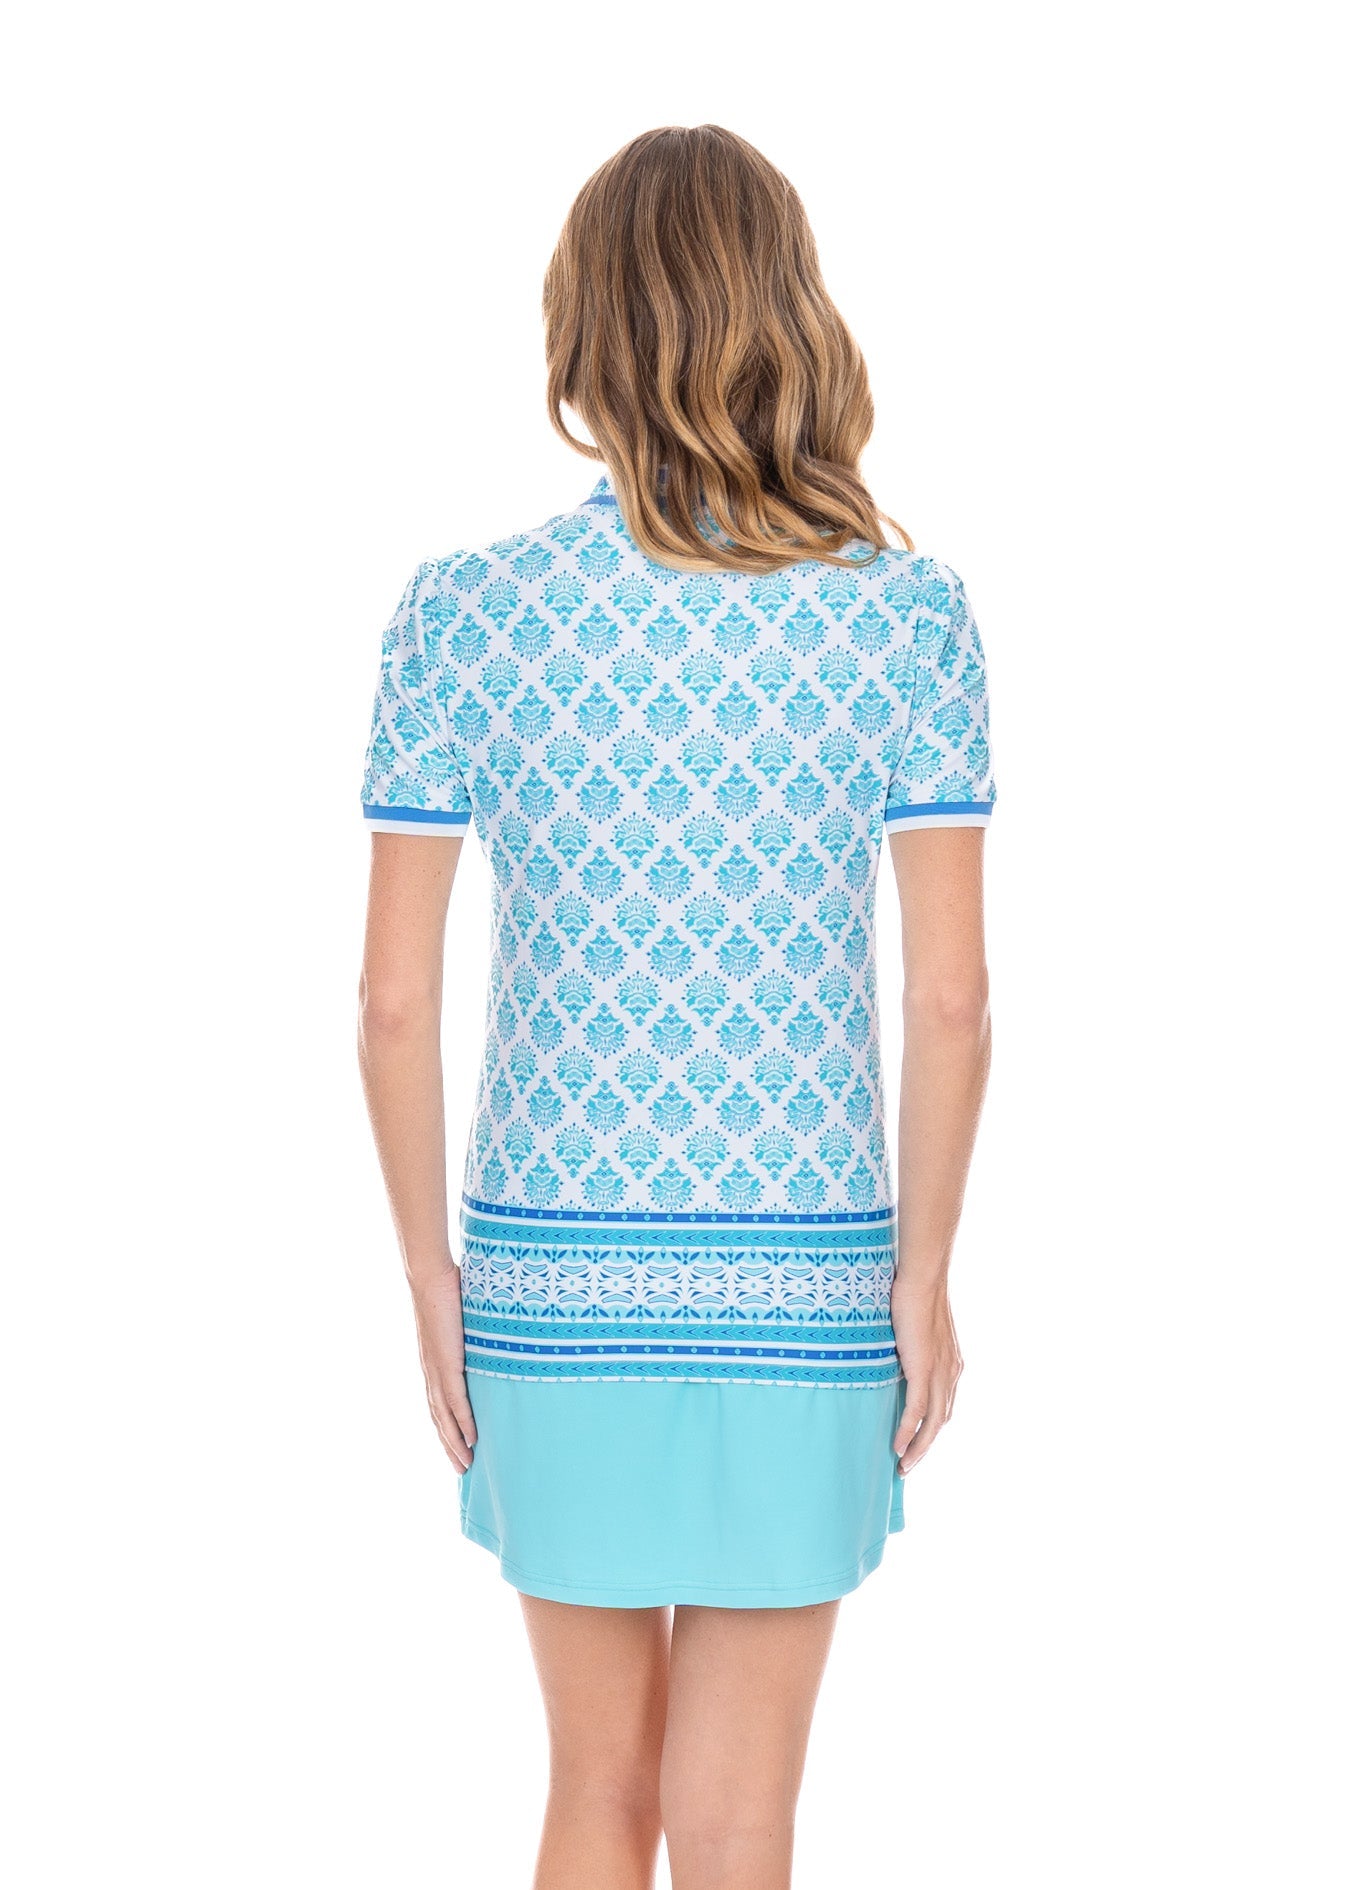 A blonde woman turned around wearing the Aqua Skort and Amalfi Coast Short Sleeve Collared Quarter Zip in front of a white background.